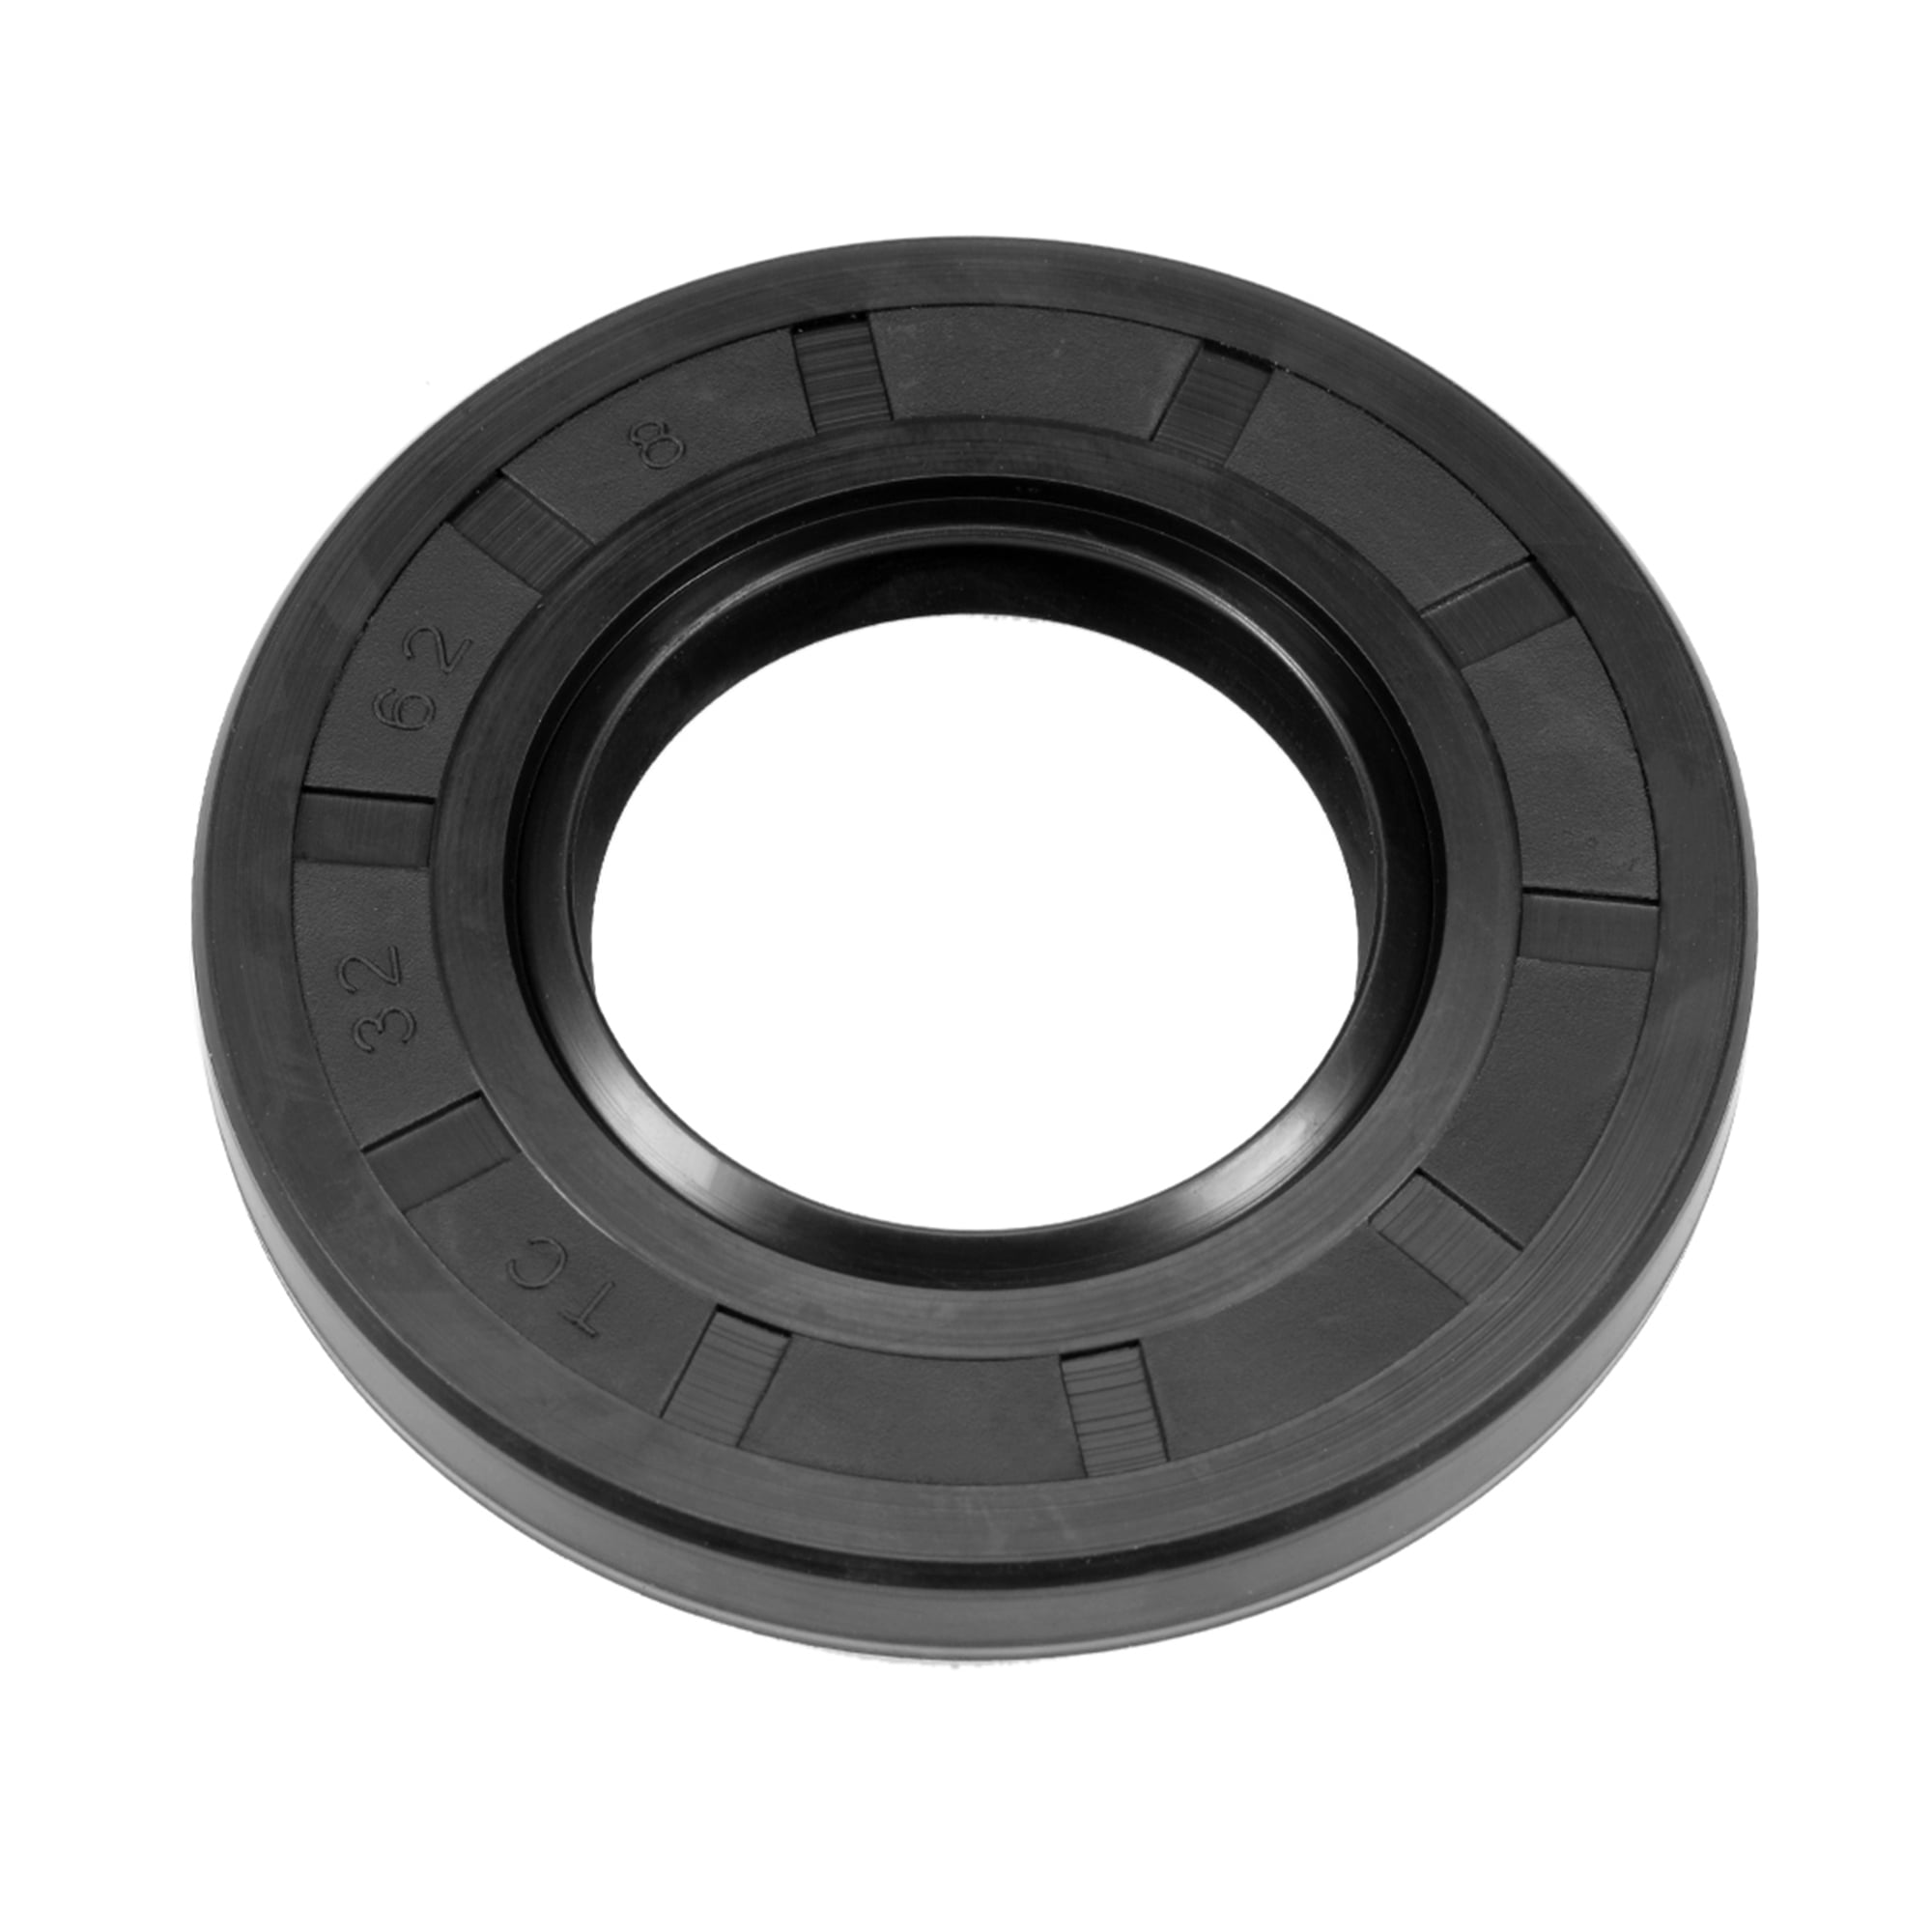 Oil Seal Size 15mm X 32mm X 7mm 10 Pack 